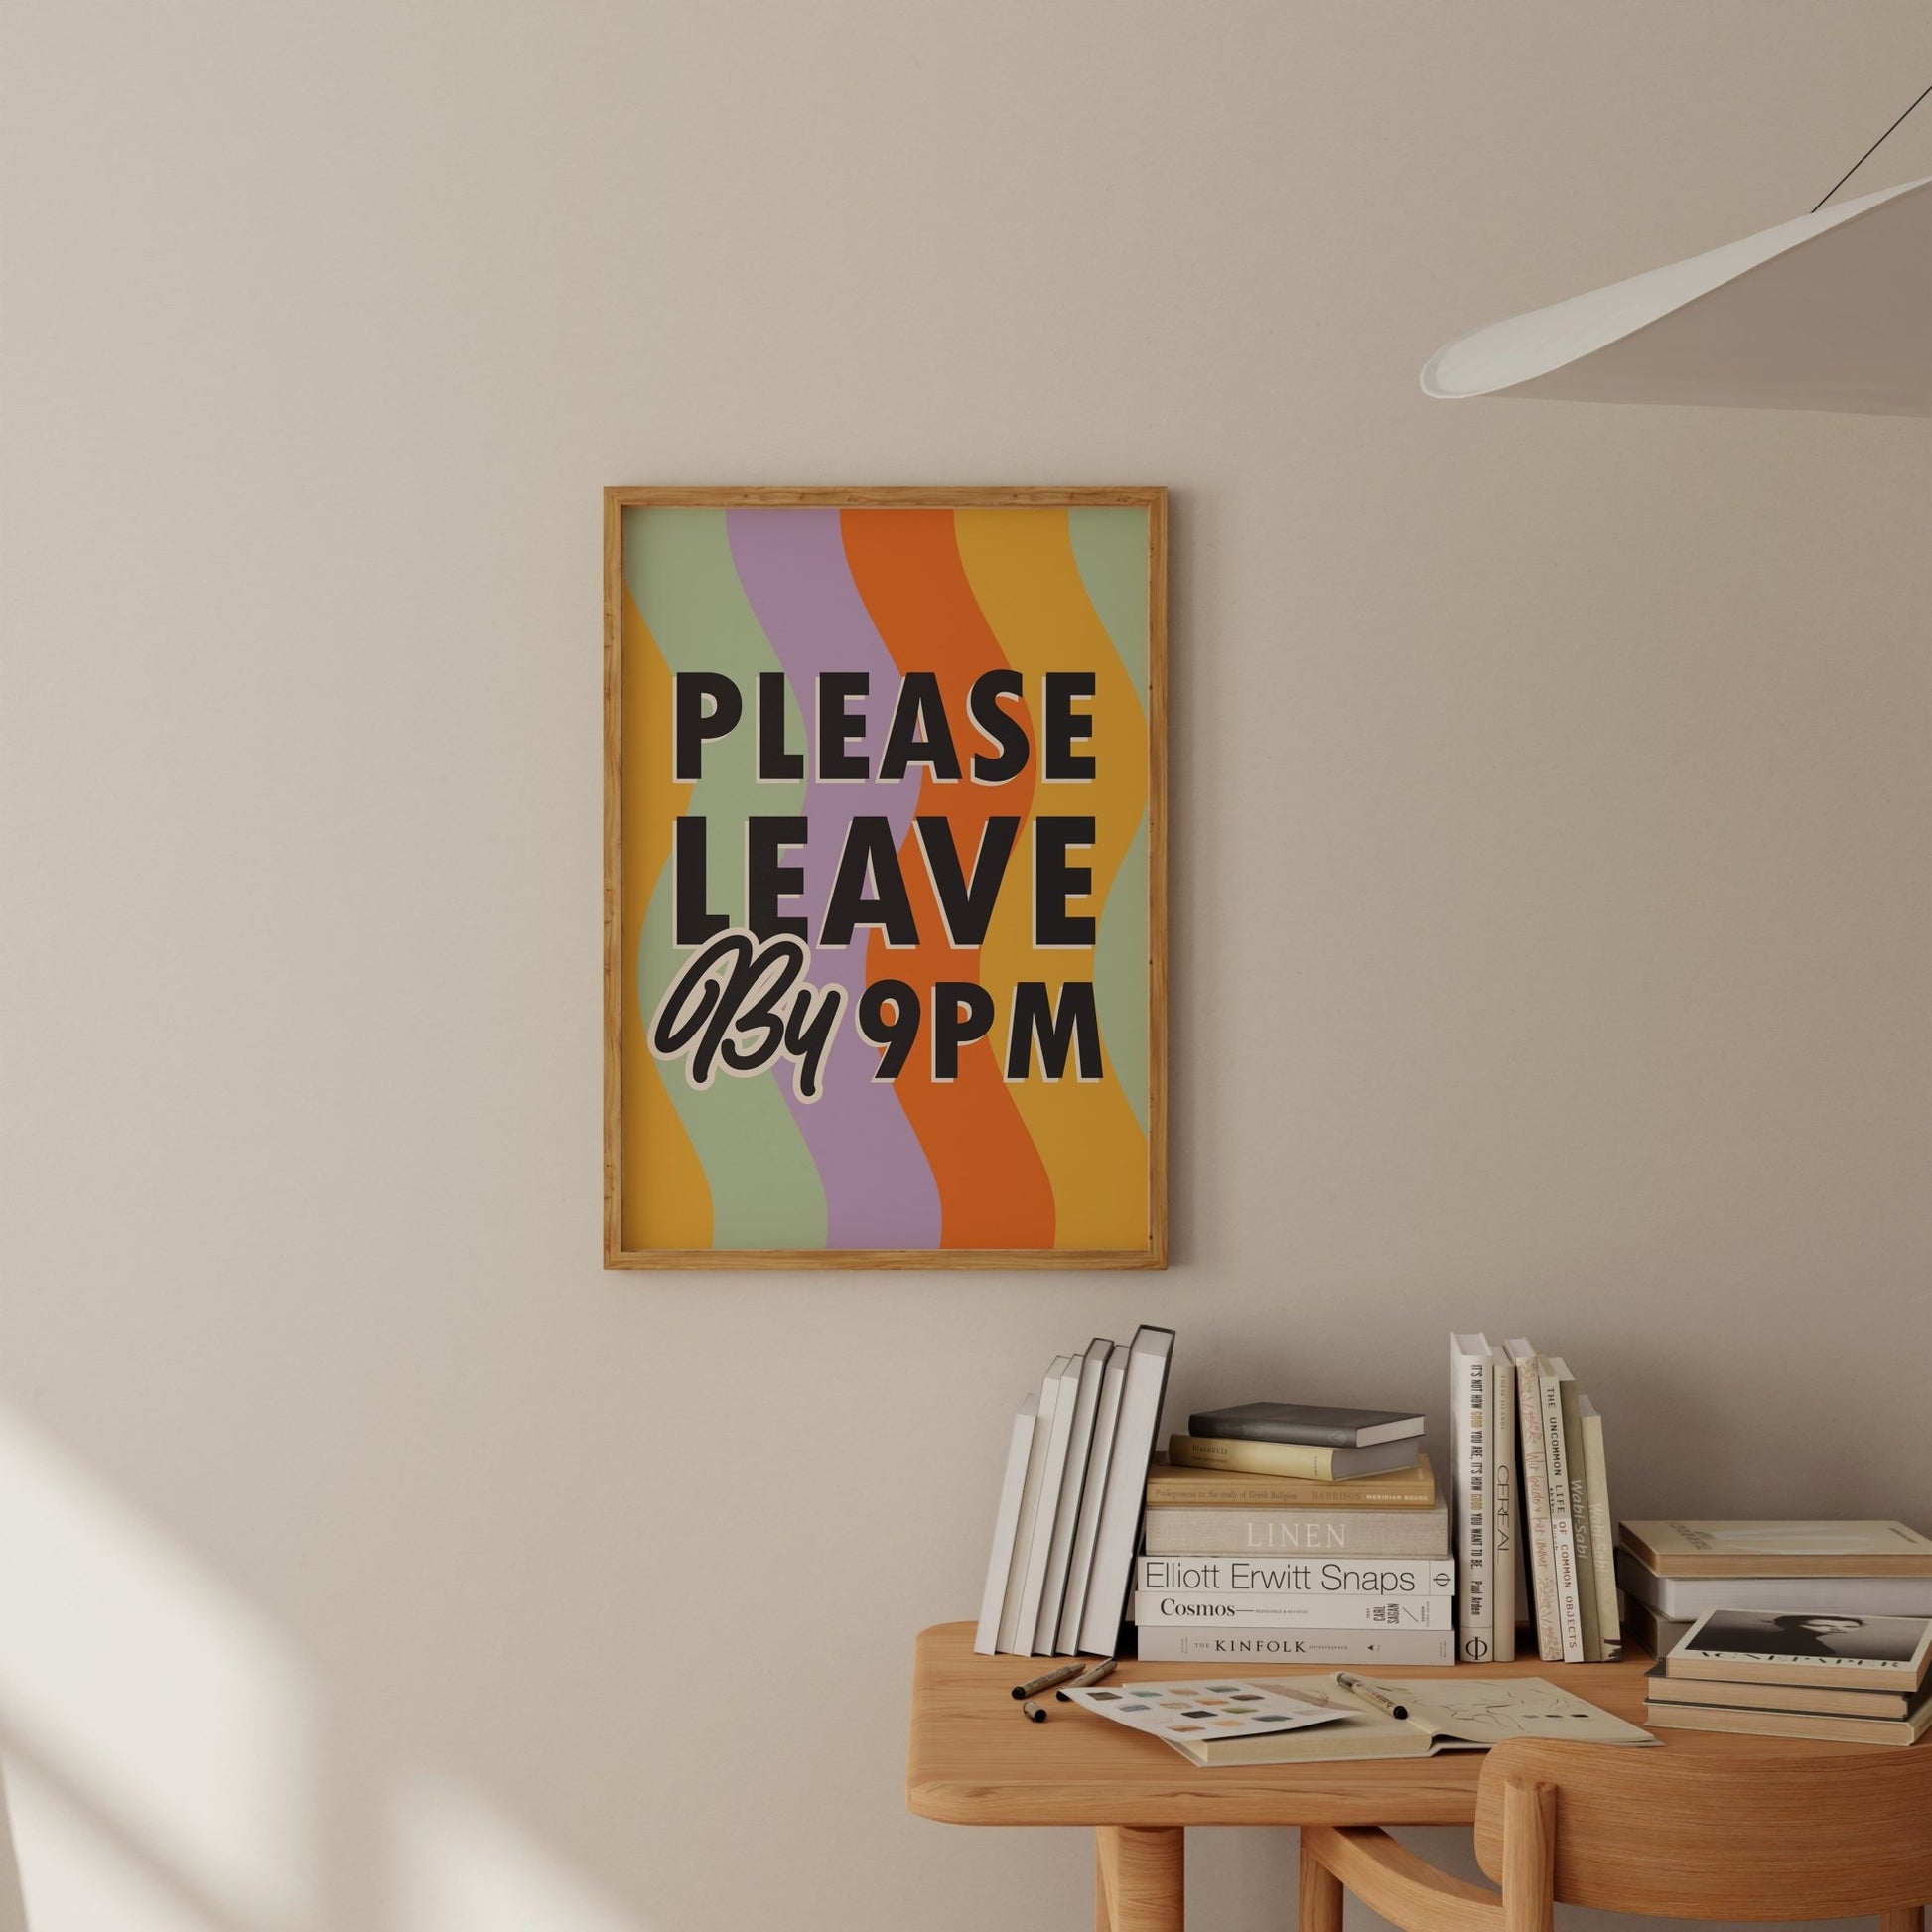 Please Leave by 9PM - POSTERAMI